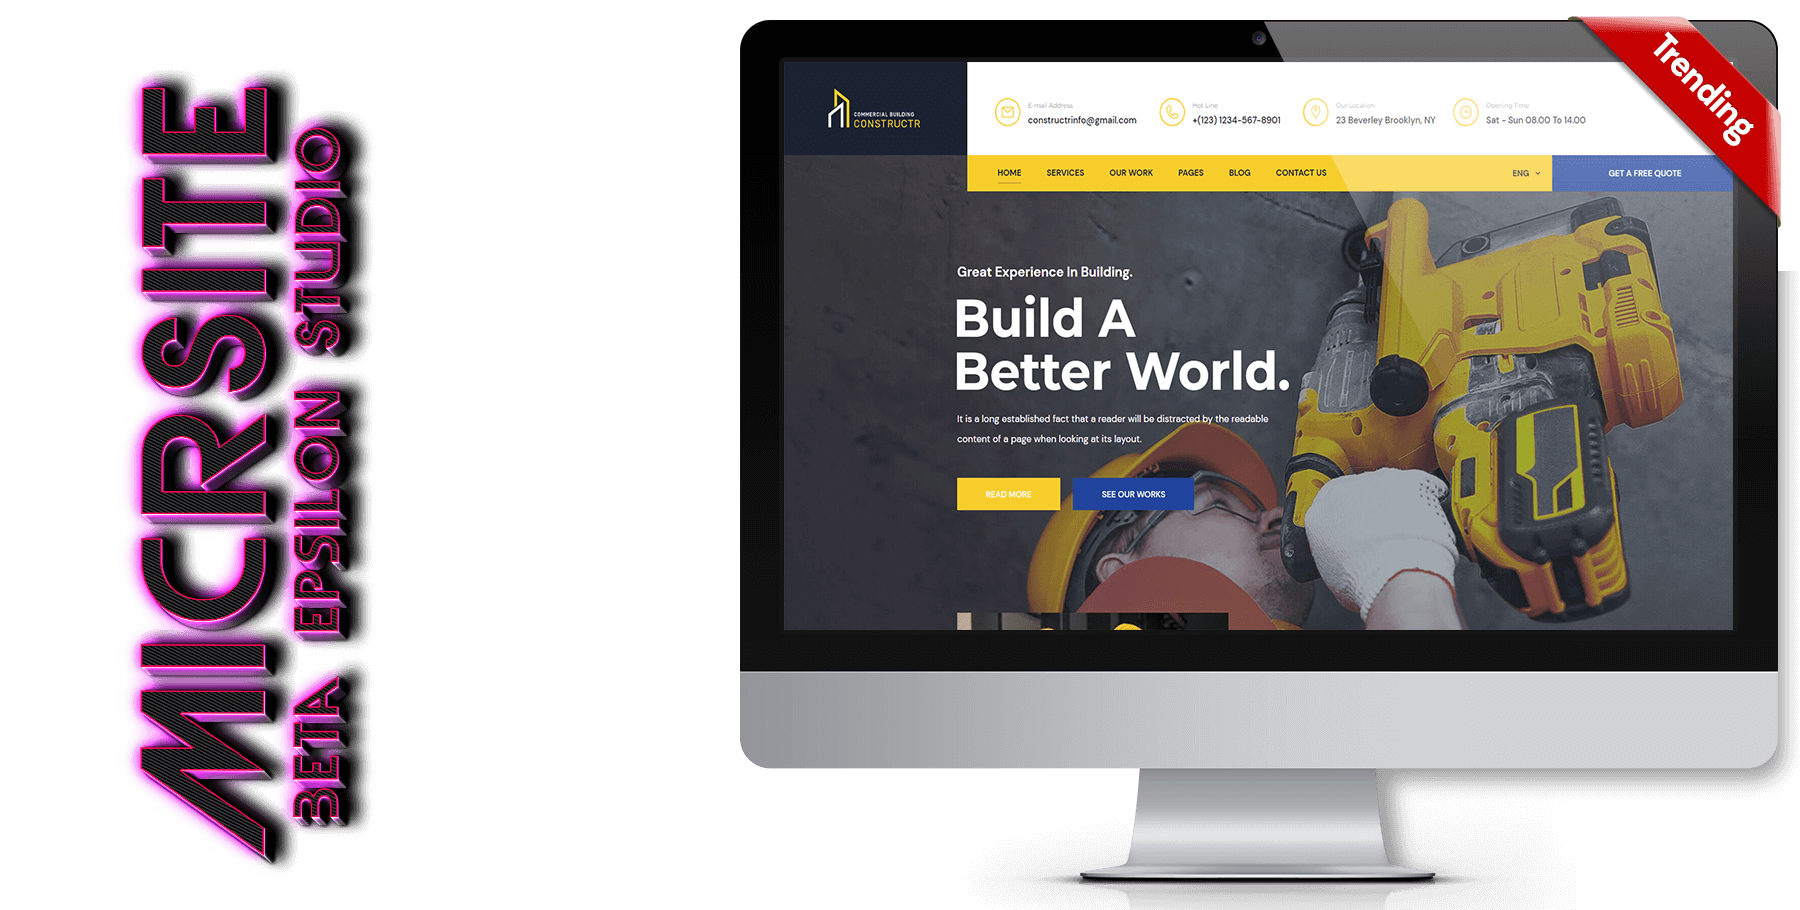 A website design in construction named ConstructR